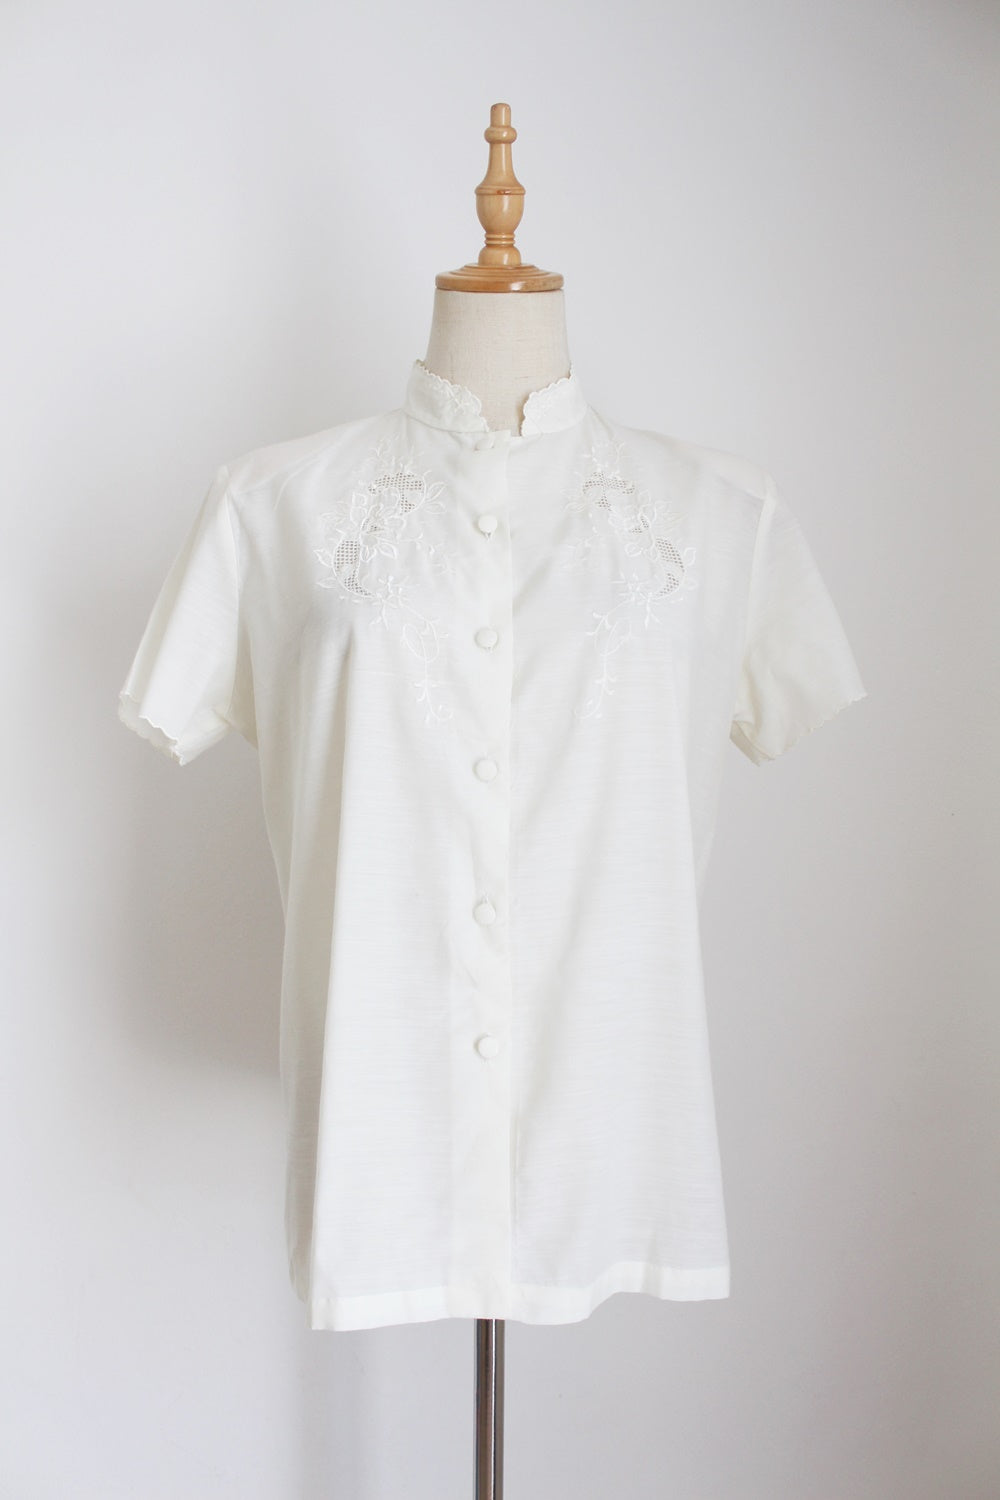 VINTAGE CHINESE EMBROIDERY SHIRT CREAM - SIZE 10